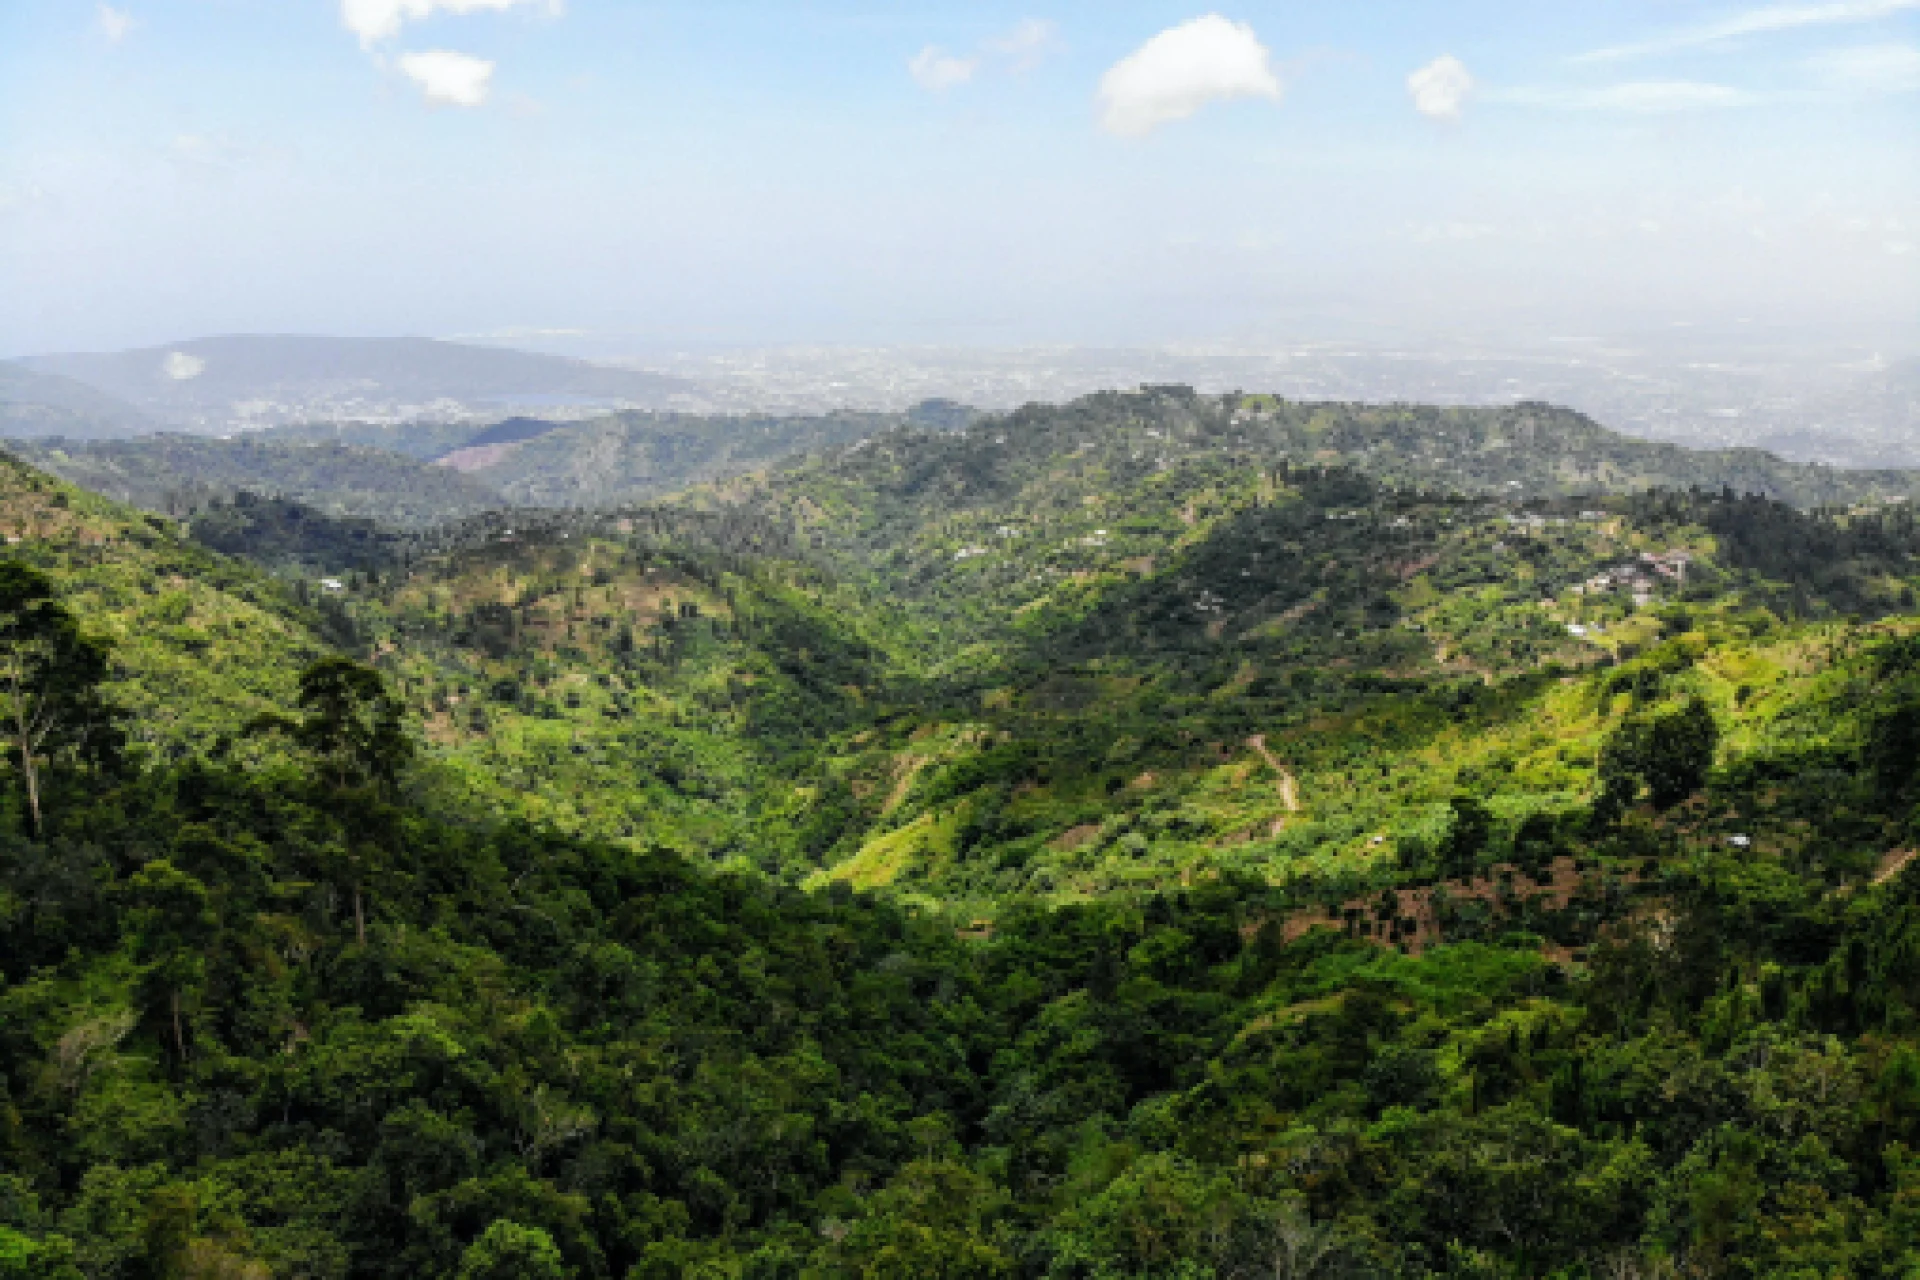 A view from the top of a mountain in jamaica.